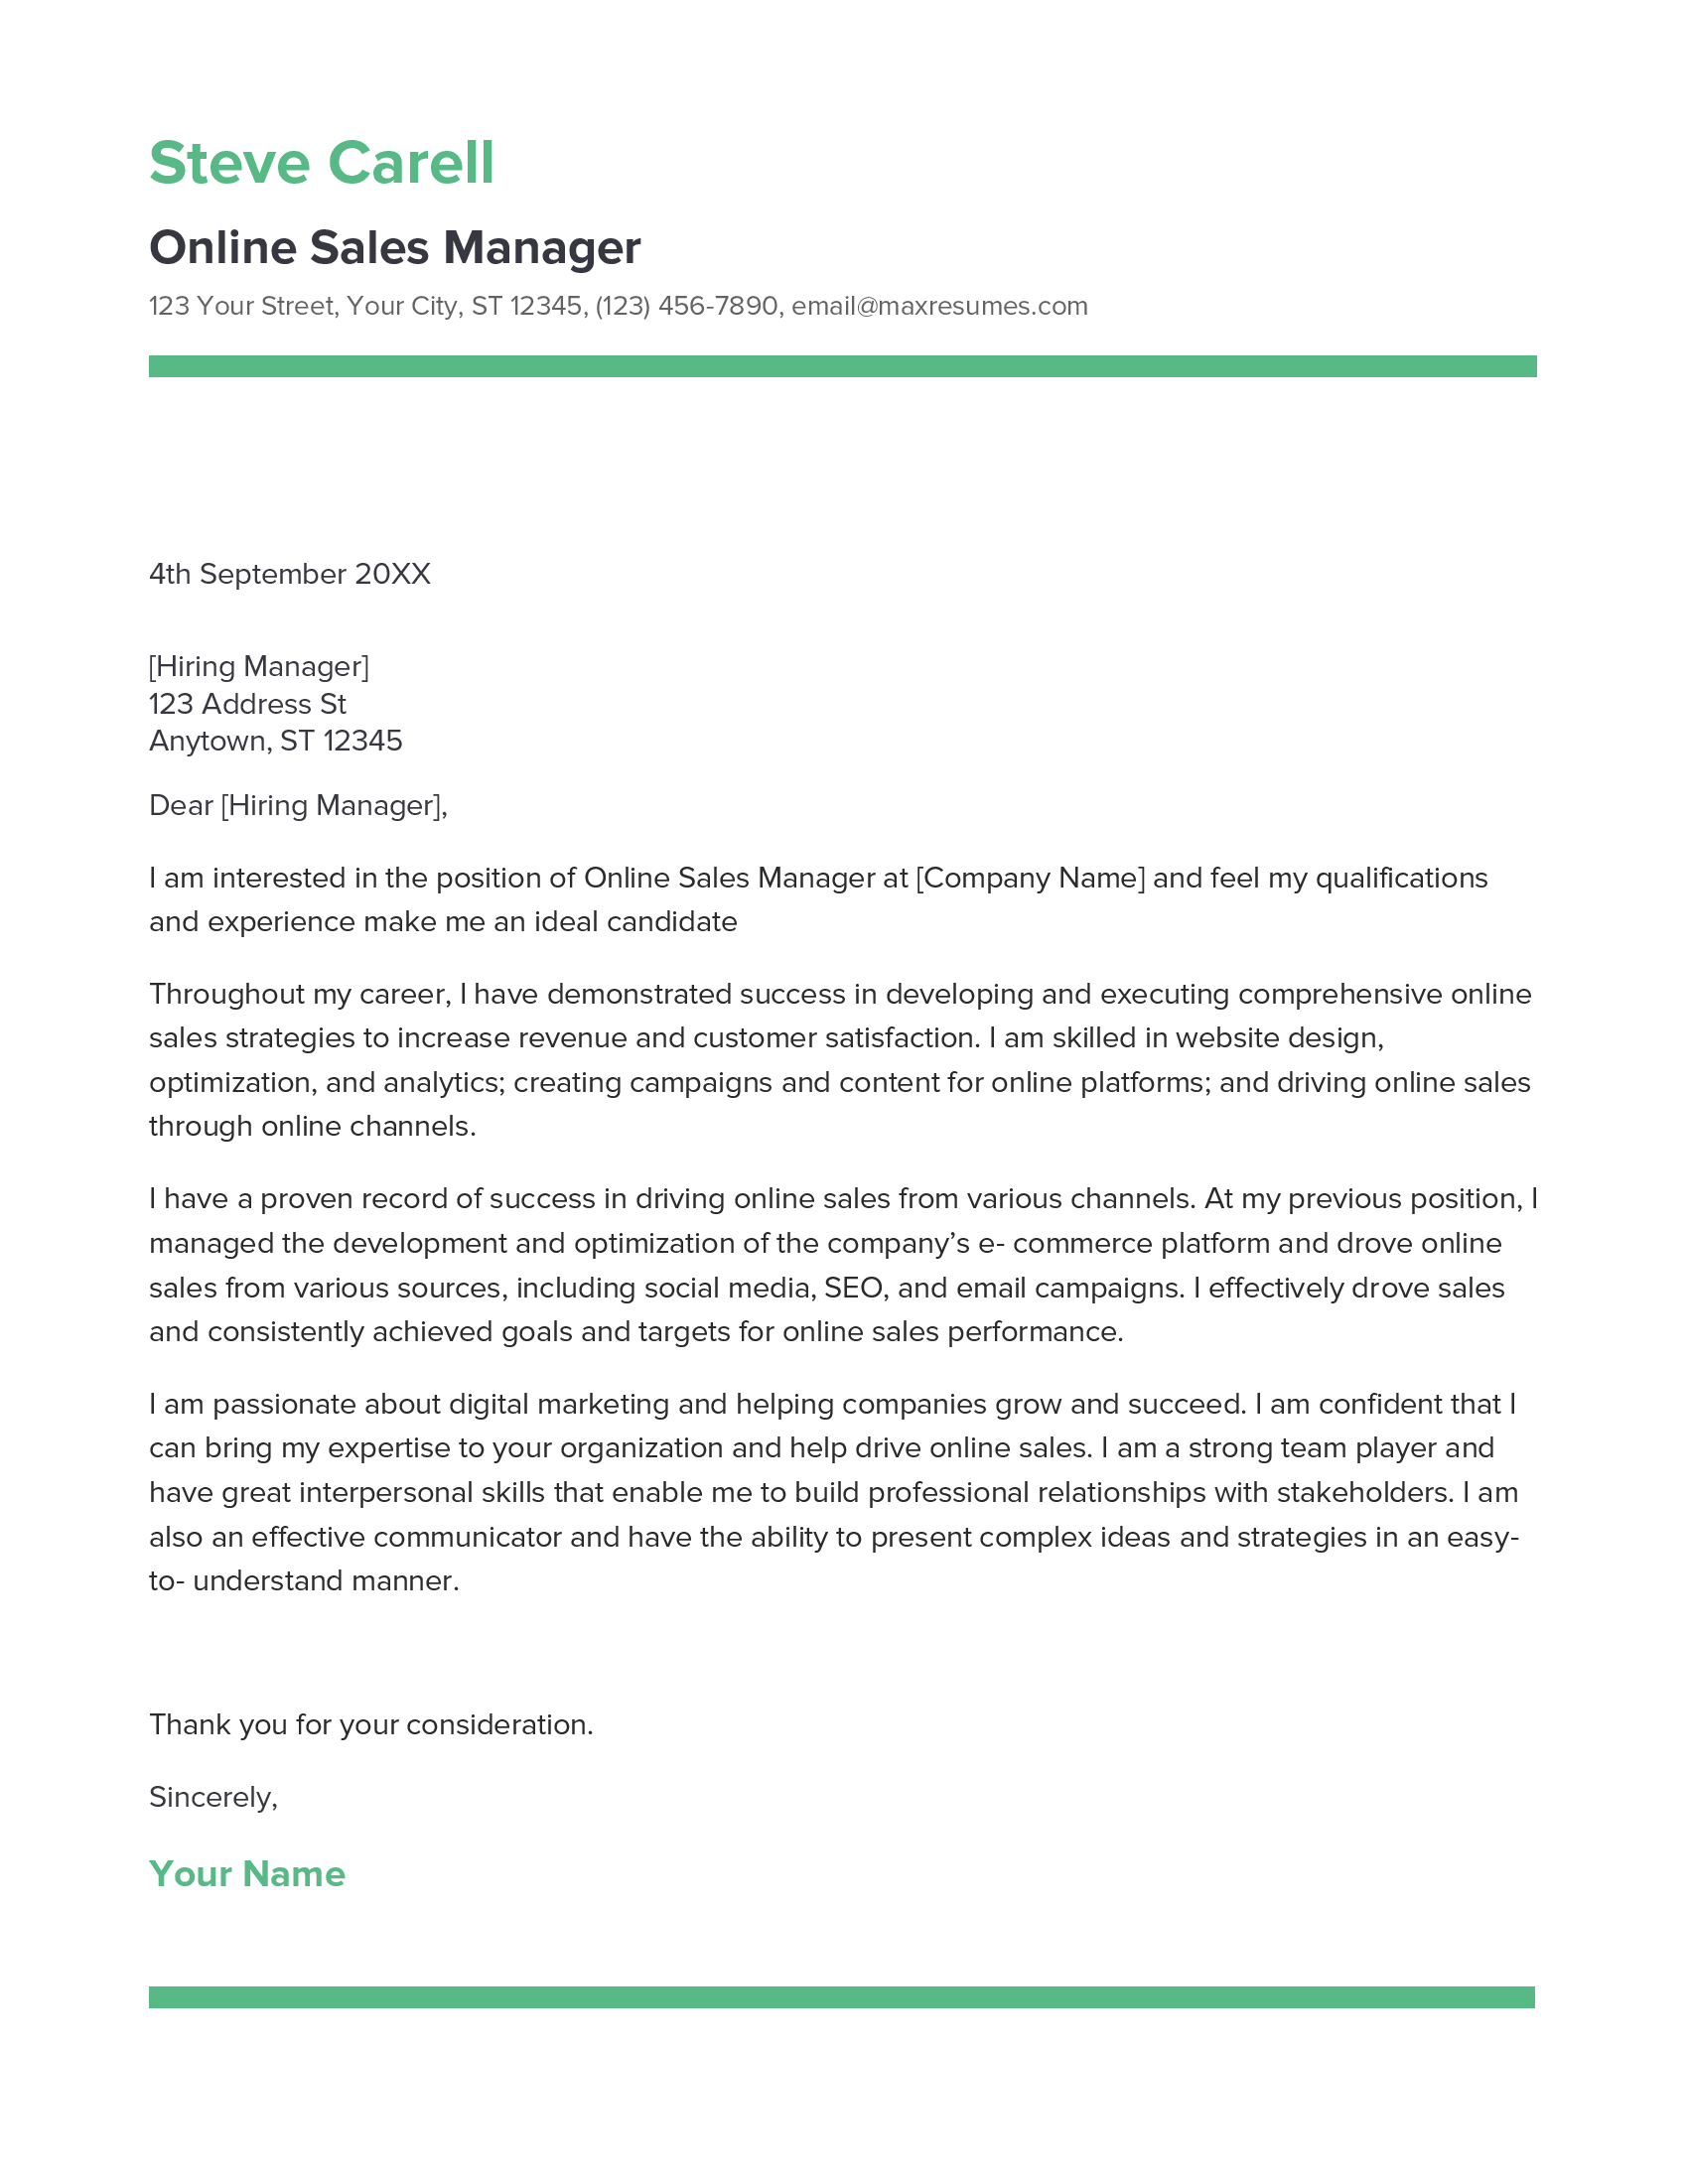 Online Sales Manager Cover Letter Example